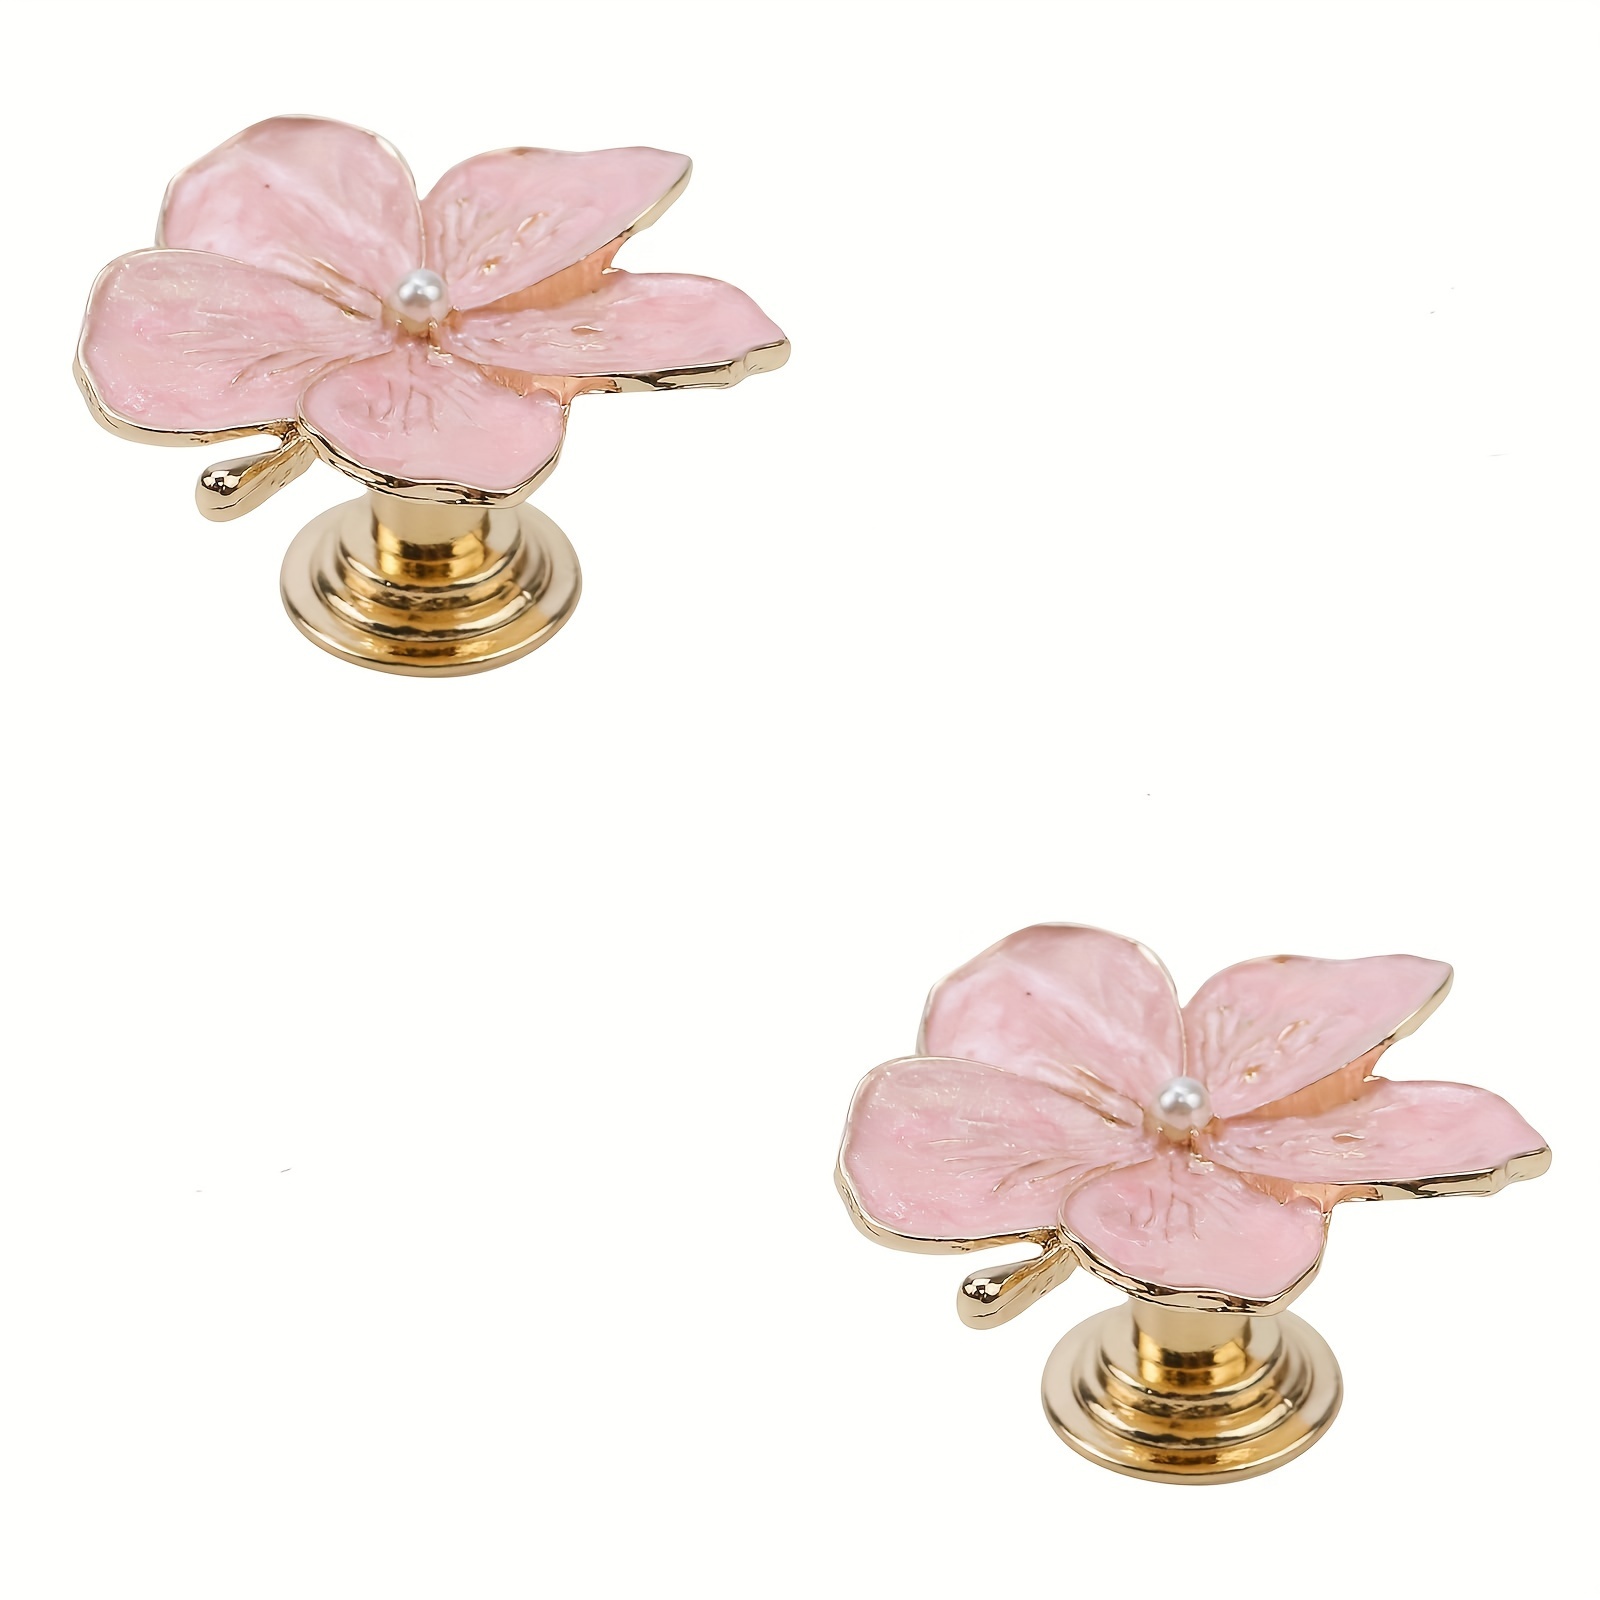 

2-pack Pearl Flower Cabinet Knobs, Oil-rubbed Zinc Alloy Metal, Decorative Drawer Pulls With Installation Hardware For Home Decor - 1.7-inch Pink